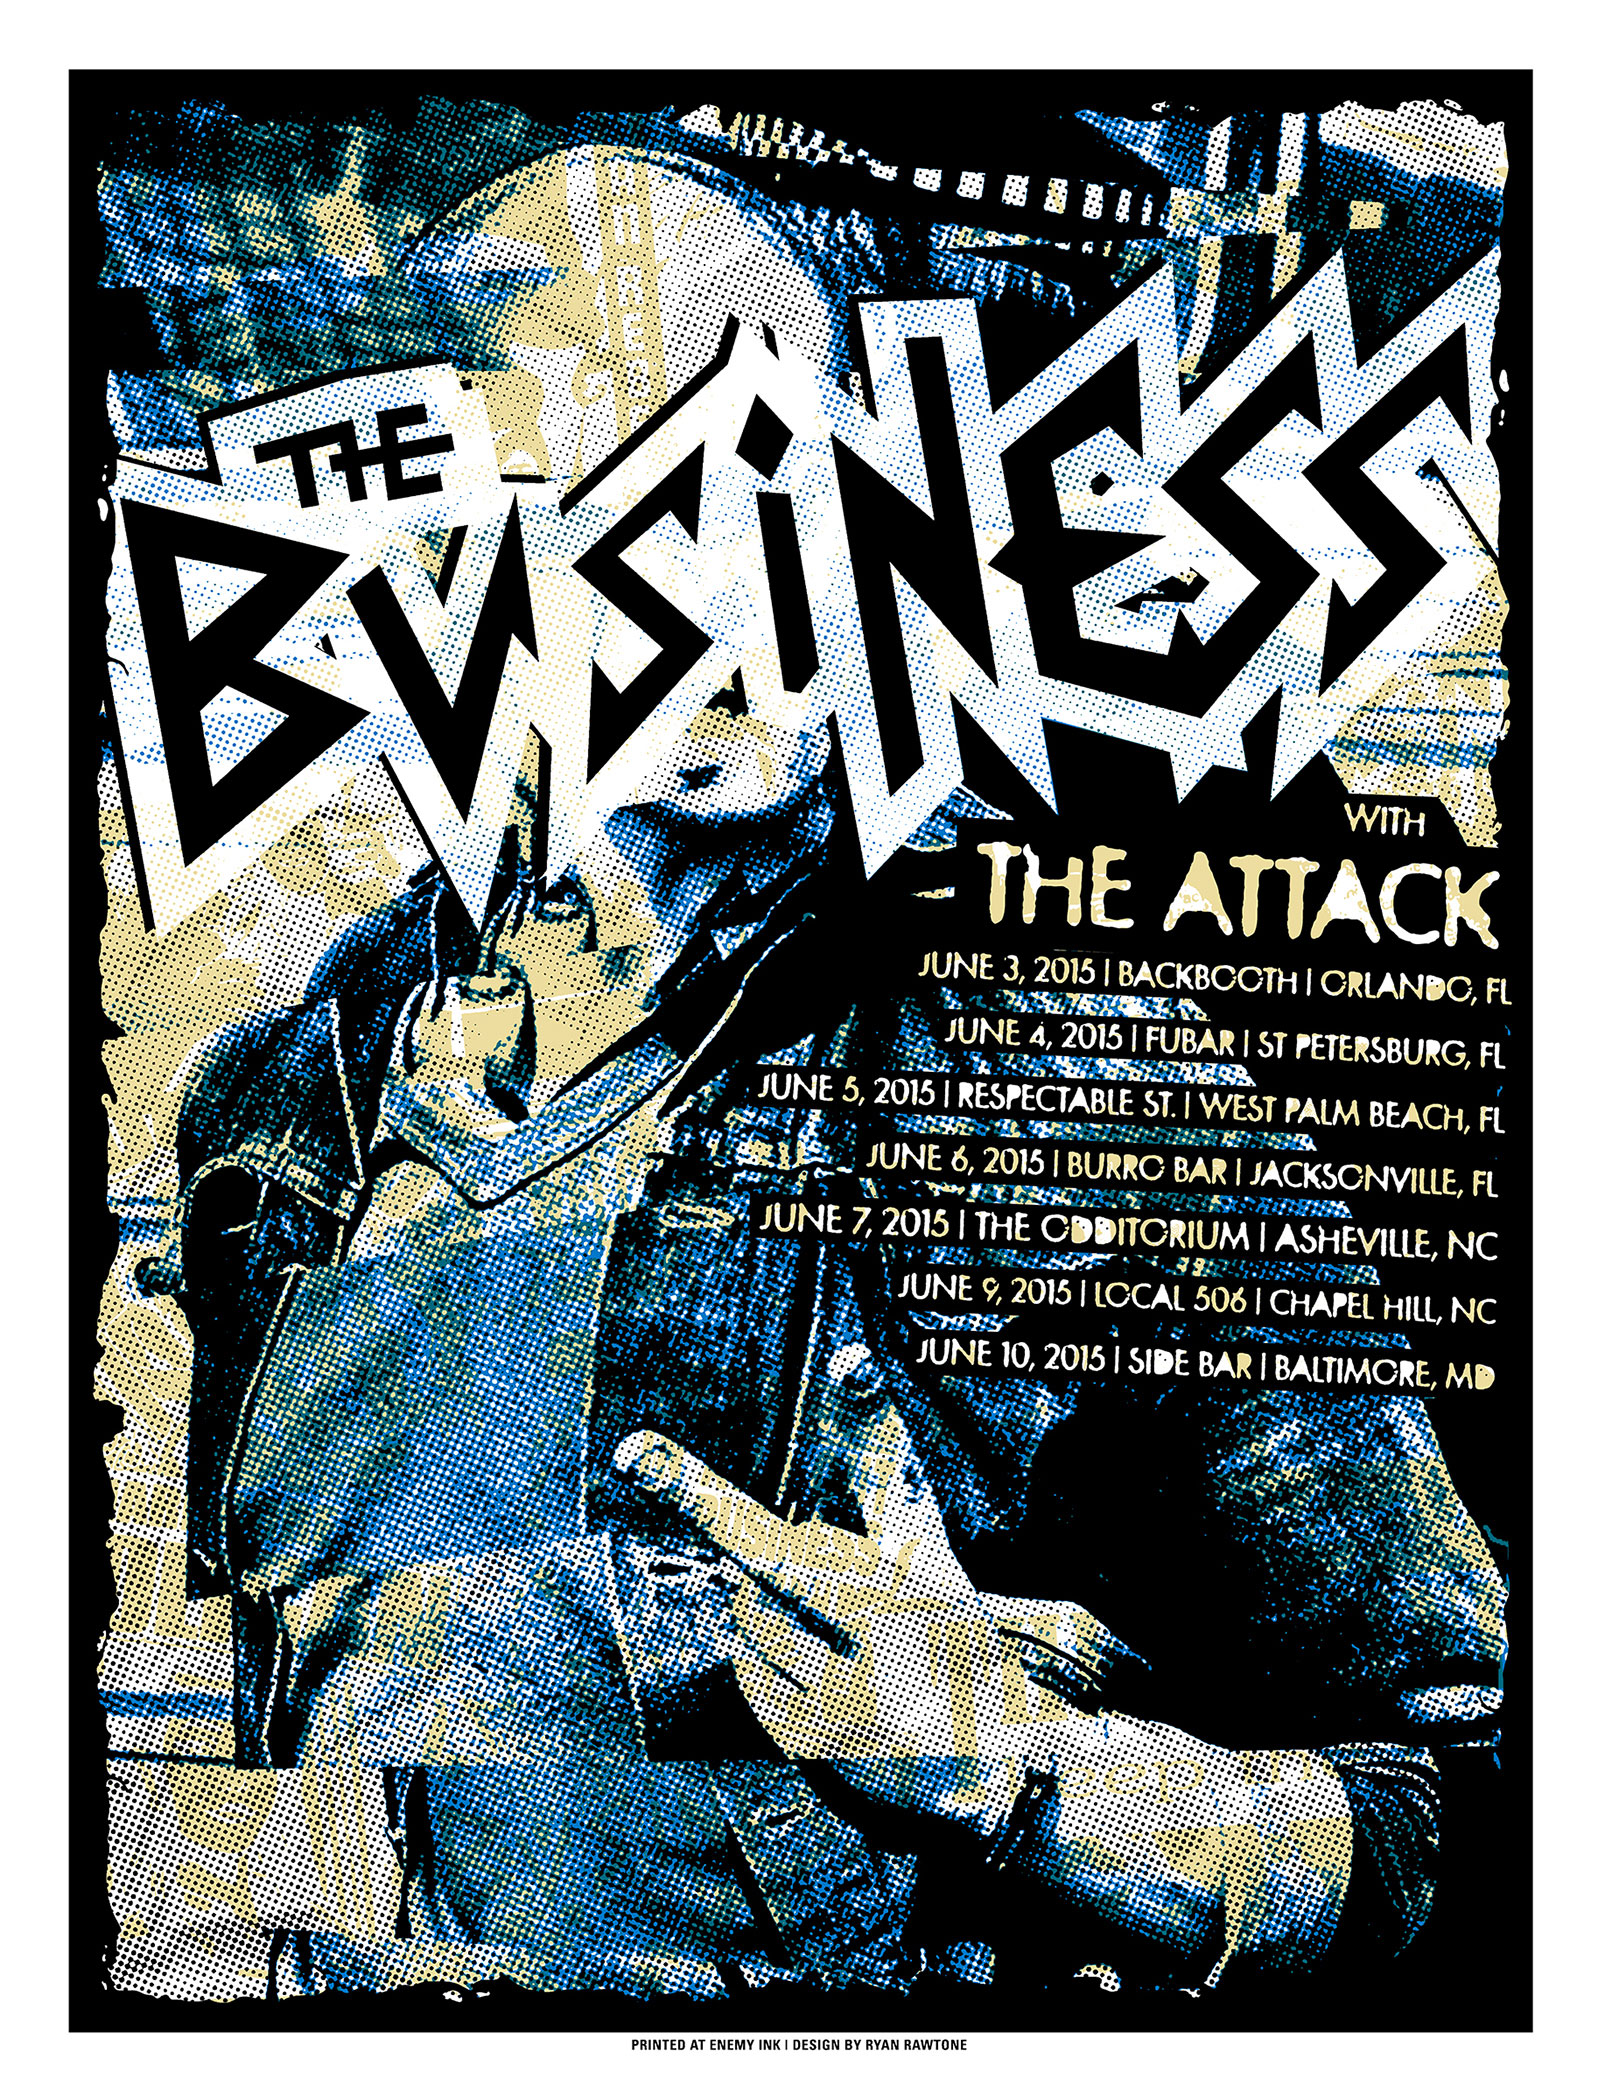 TheBusiness_Attack-June2015-Dates_poster